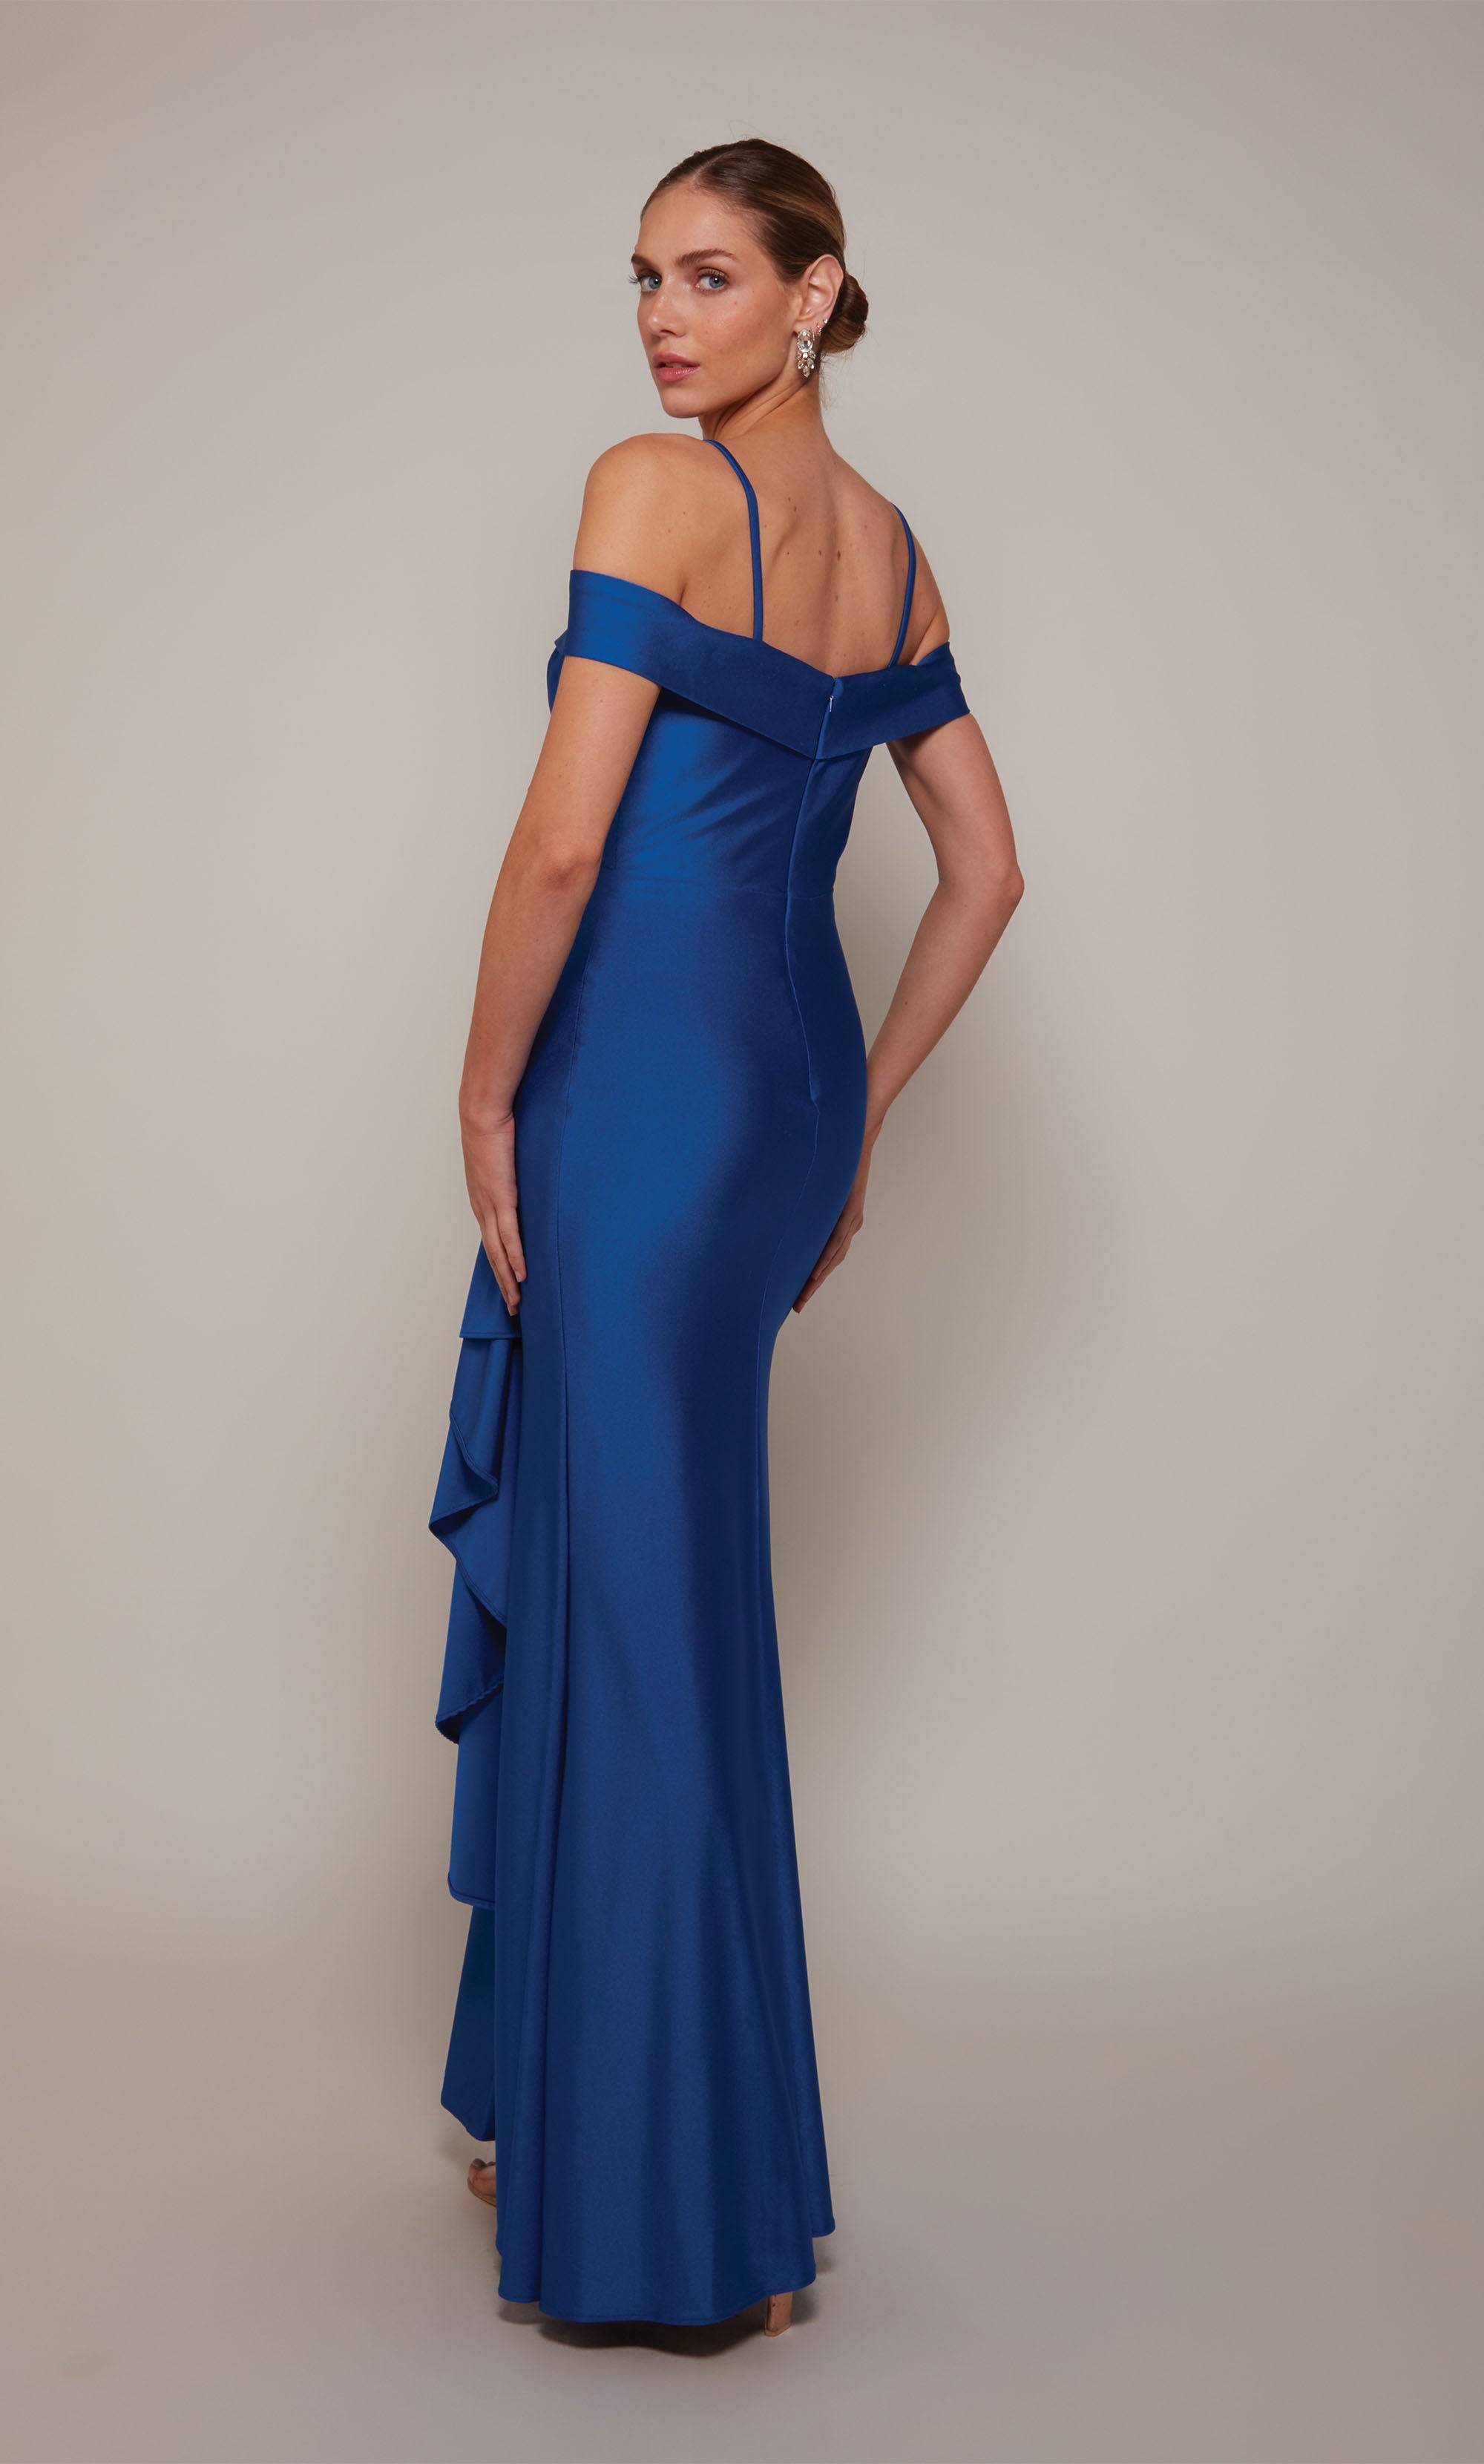 Royal blue off the shoulder long formal dress with spaghetti straps, pleated detail, a side ruffle, and a side slit.